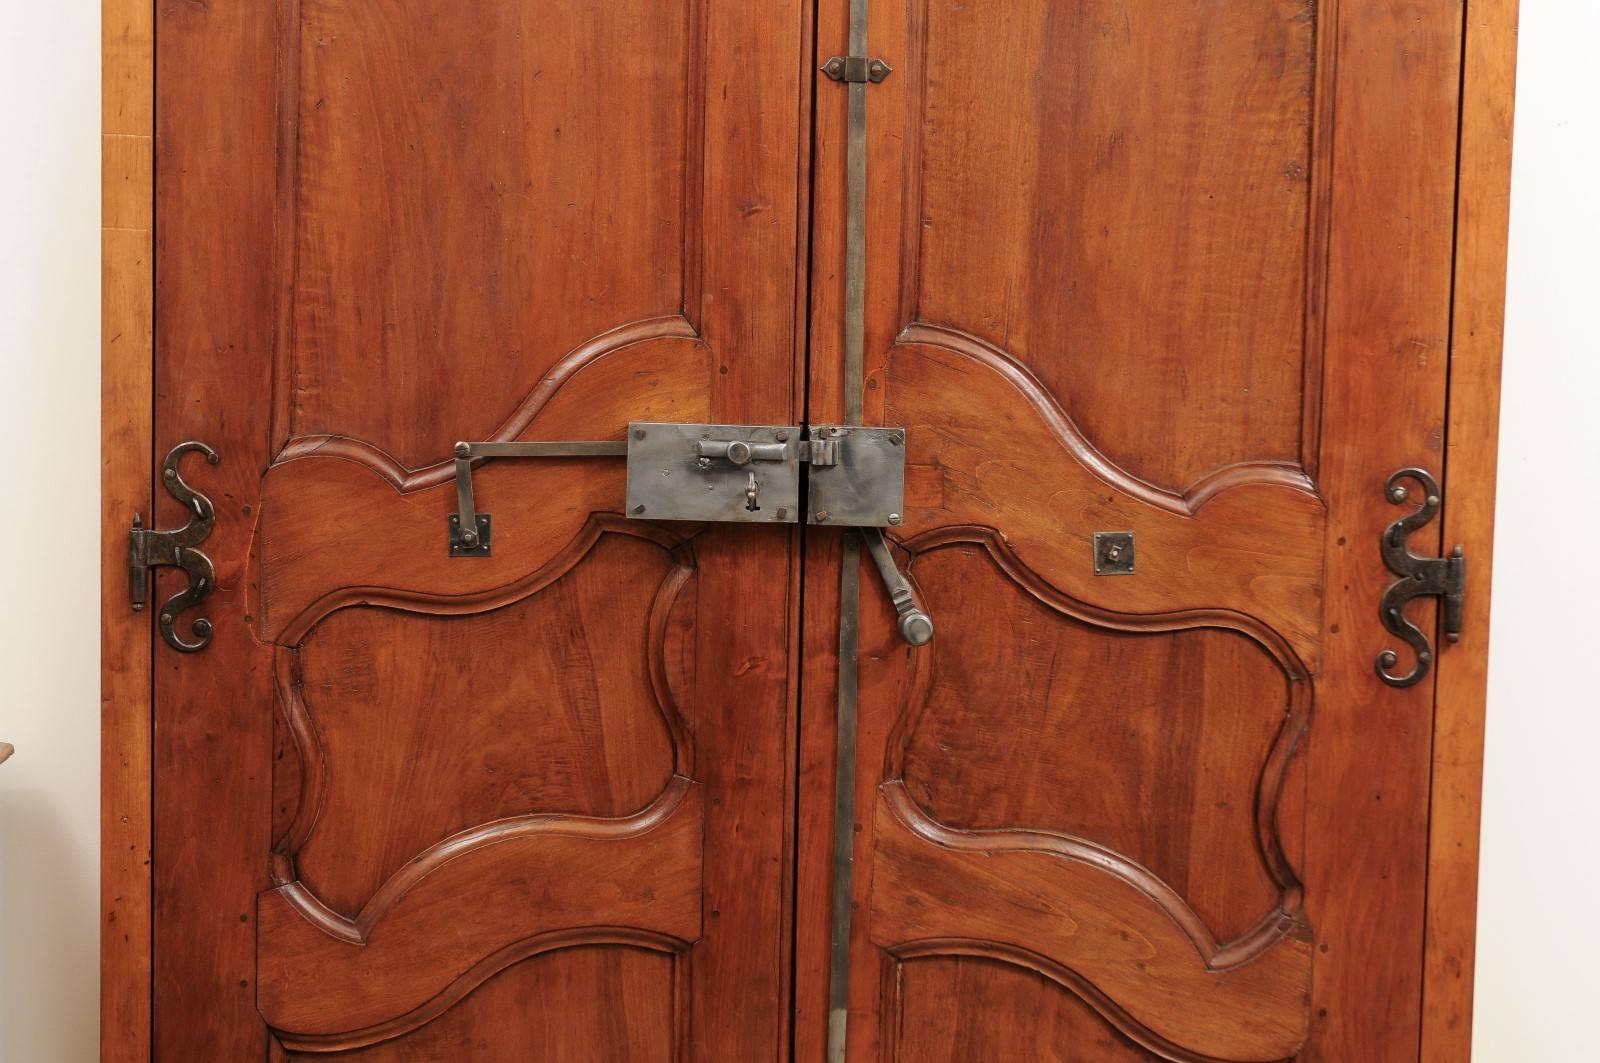 Pair of French Louis XV Style 19th Century Doors in Alder Wood with Custom Frame 3